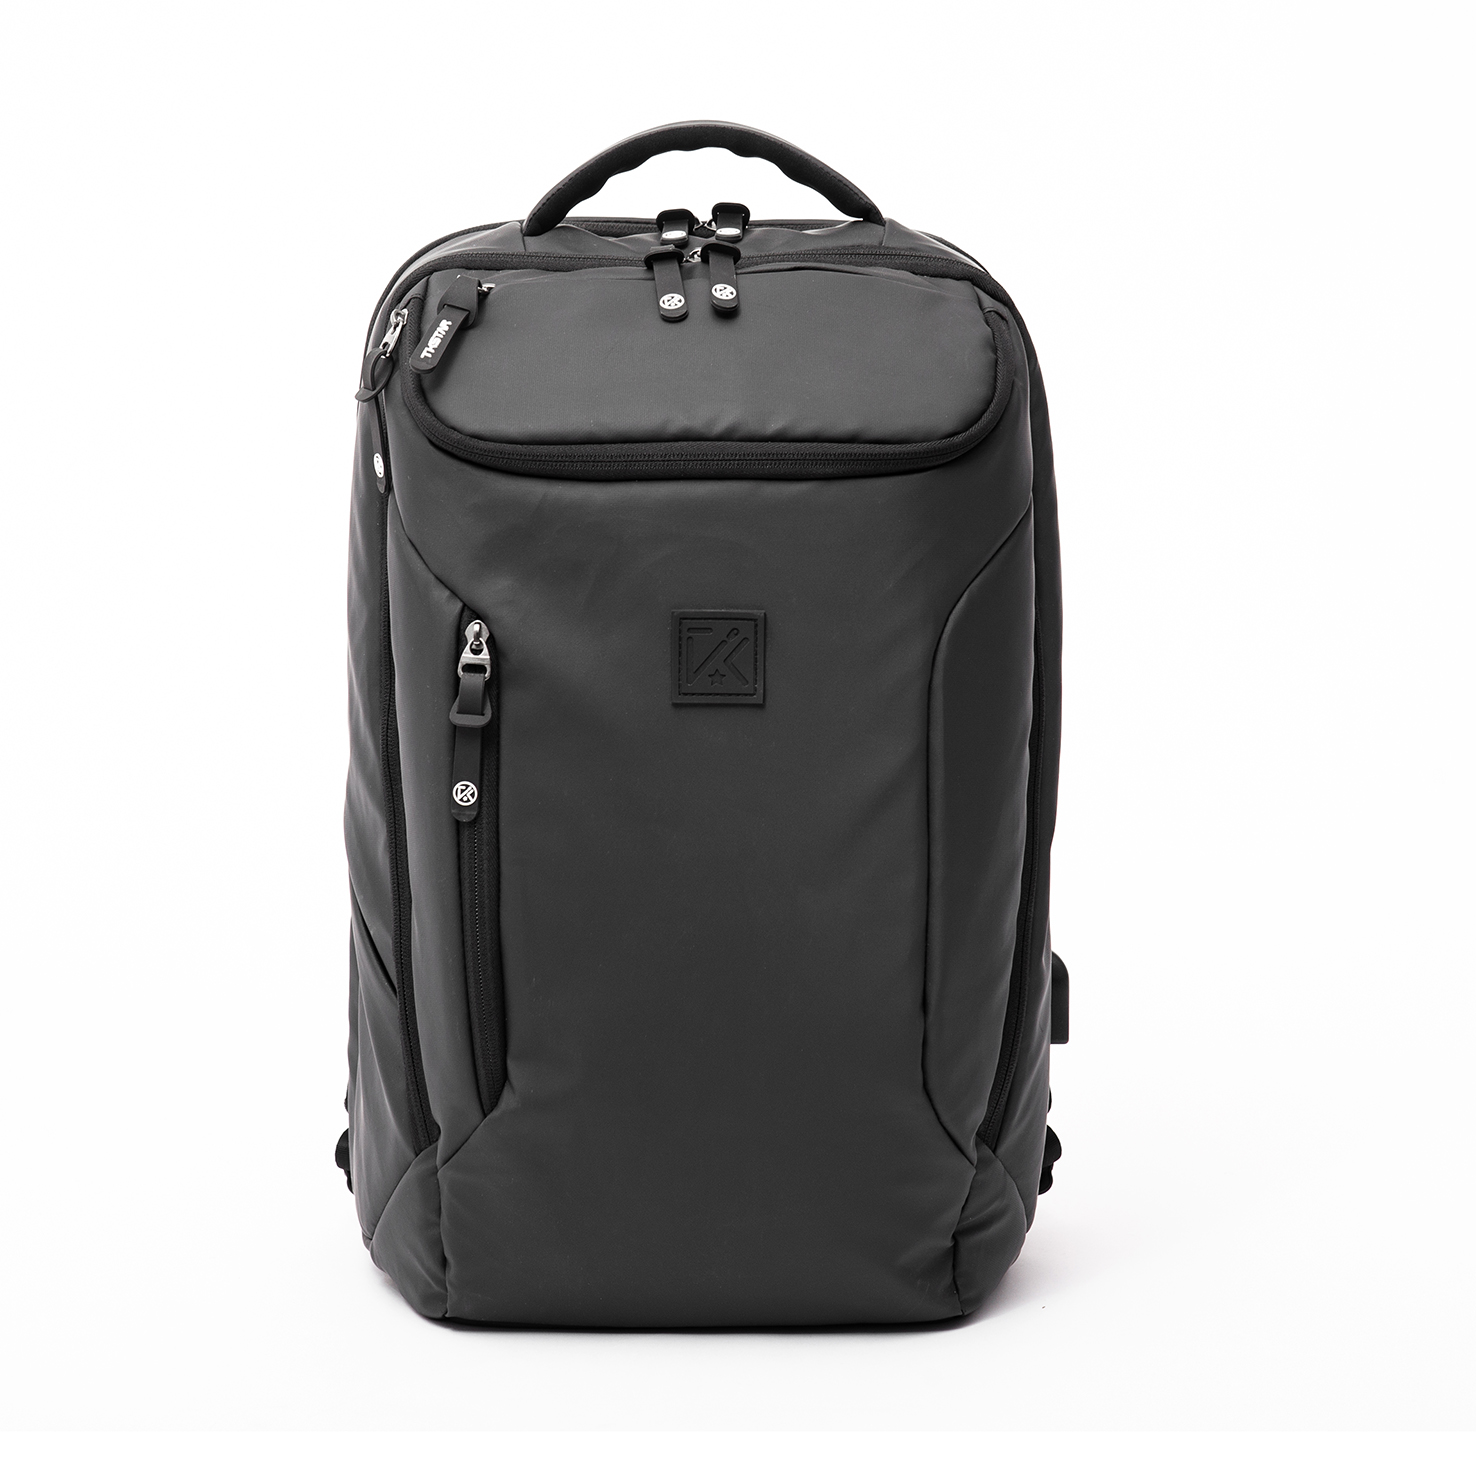 OEM Factory for Business Messenger Bag - Multifunction stylish and fashion business backpack travel bag with laptop compartment – Twinkling Star